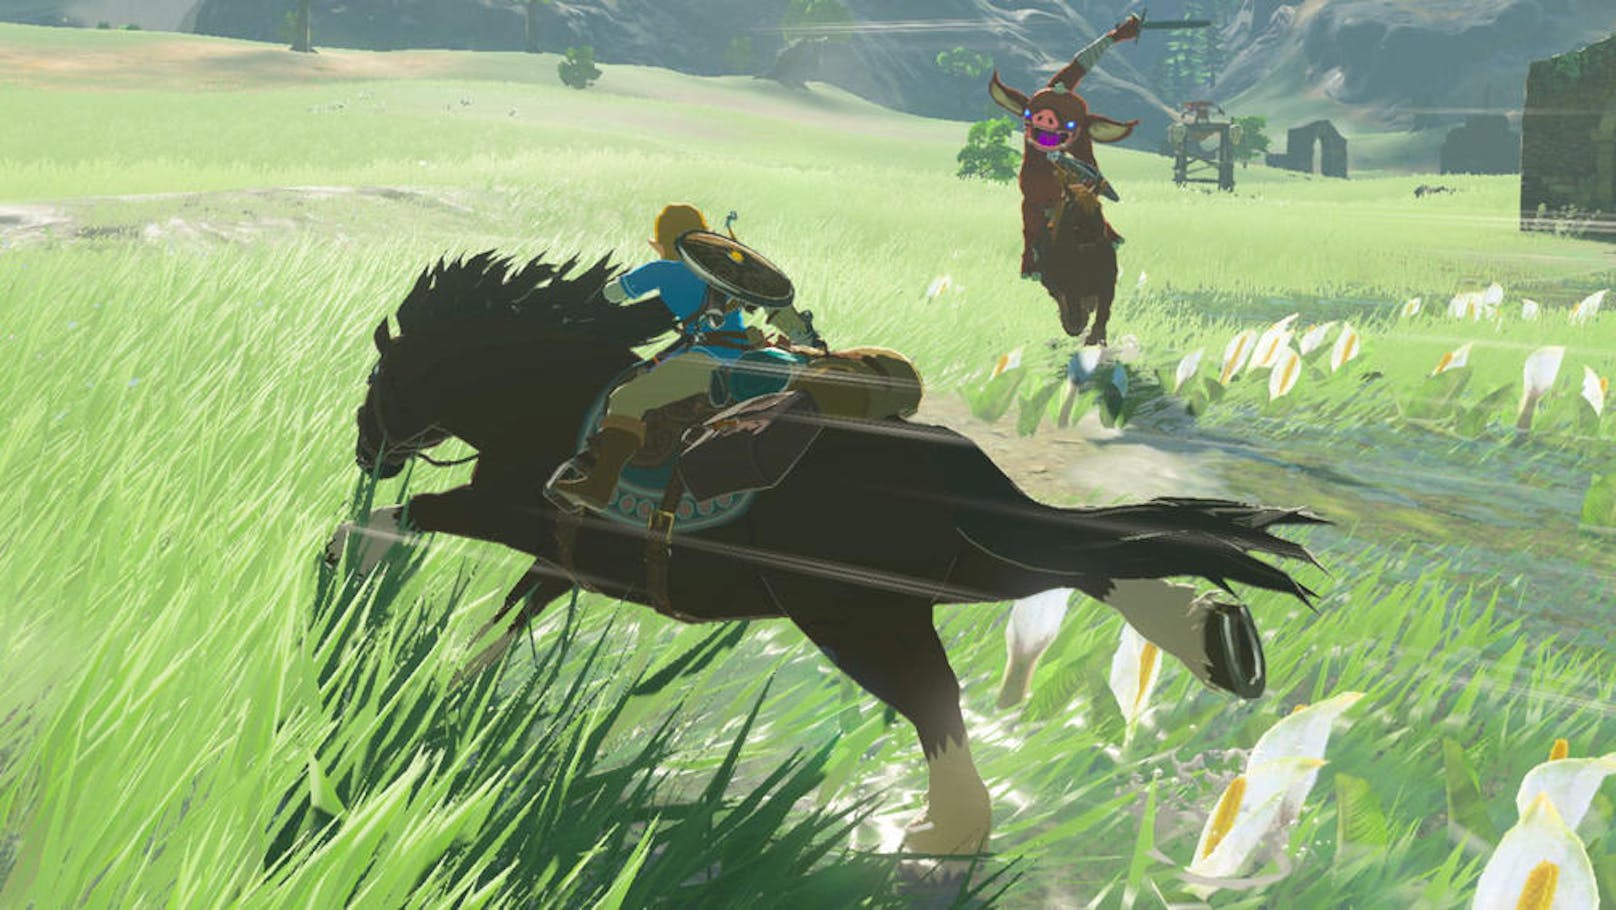 <b>Best Game Direction</b>
The Legend of Zelda: Breath of the Wild